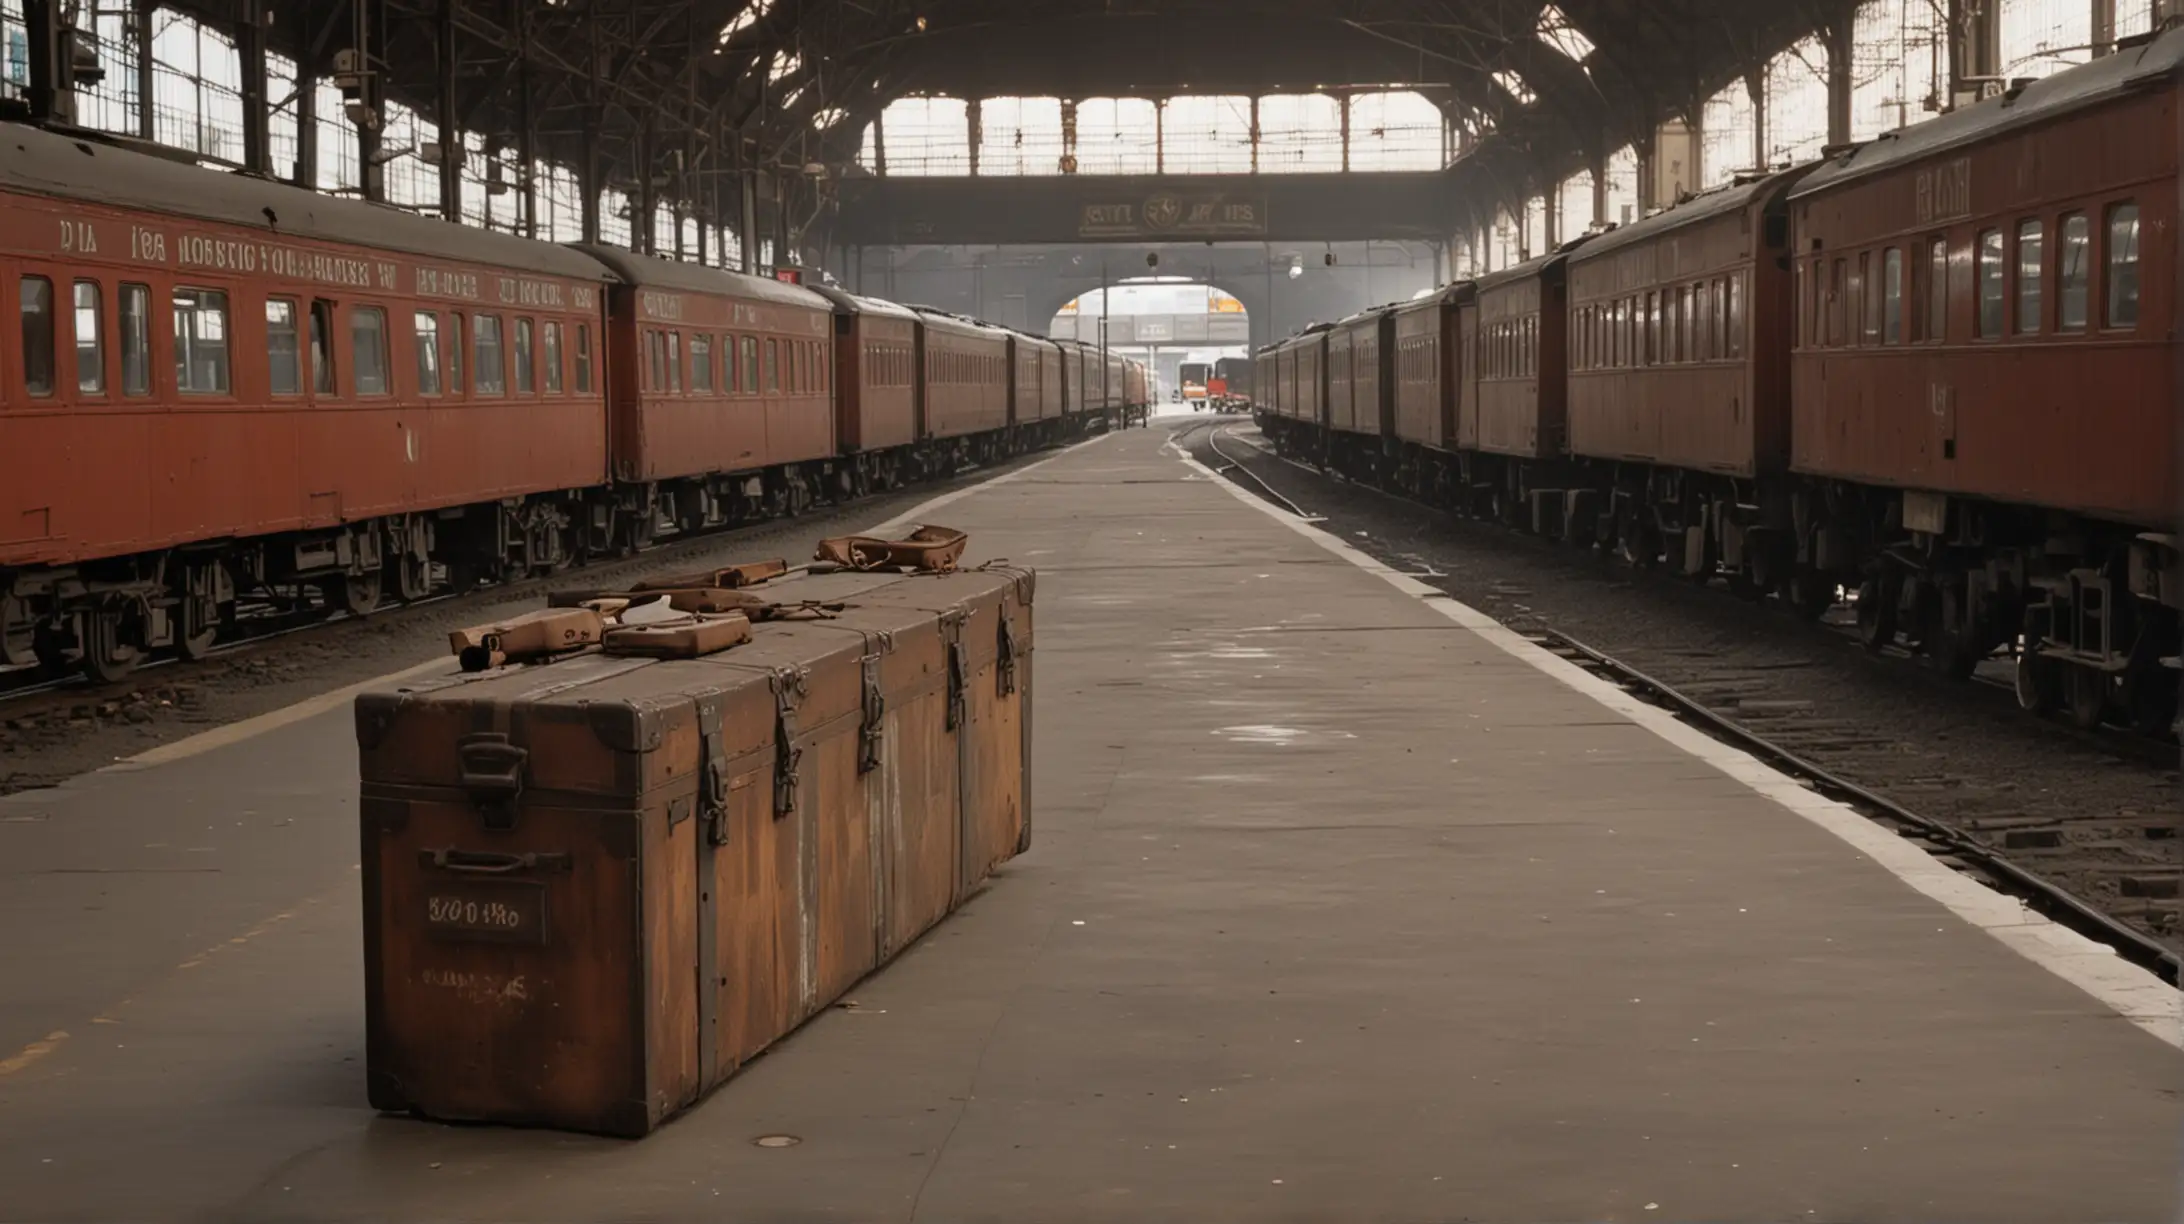 Train Station Hall with Trains in Distance and Vintage Trunks with Key